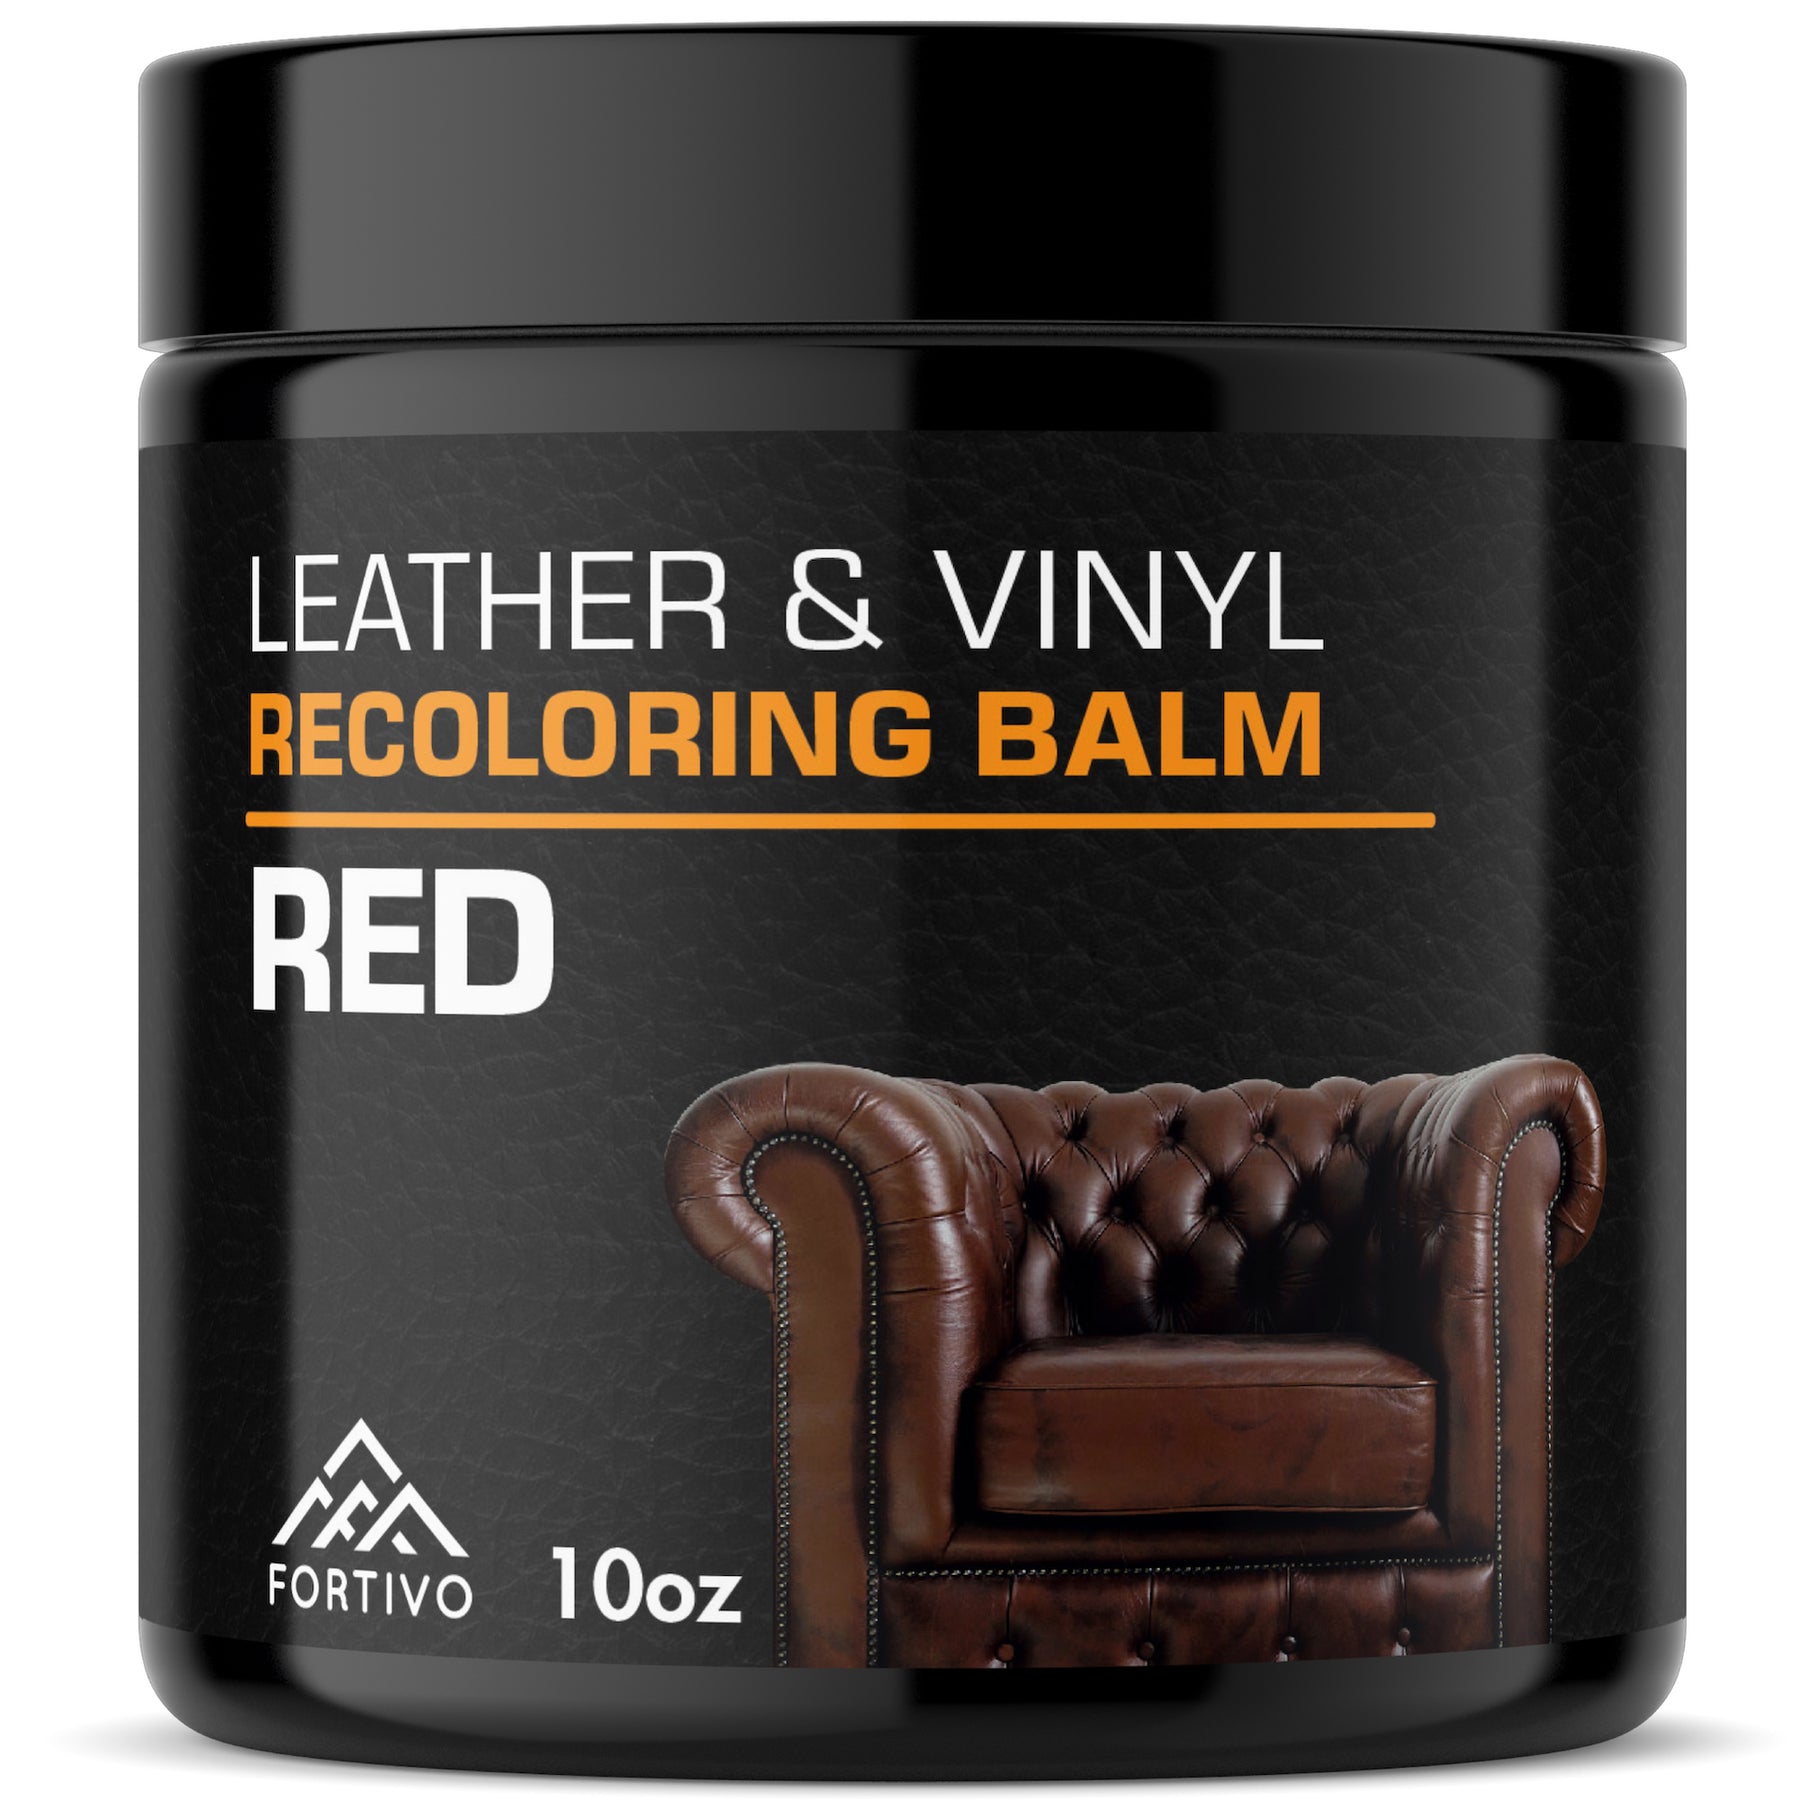 Leather Repair Paint - Furniture Clinic